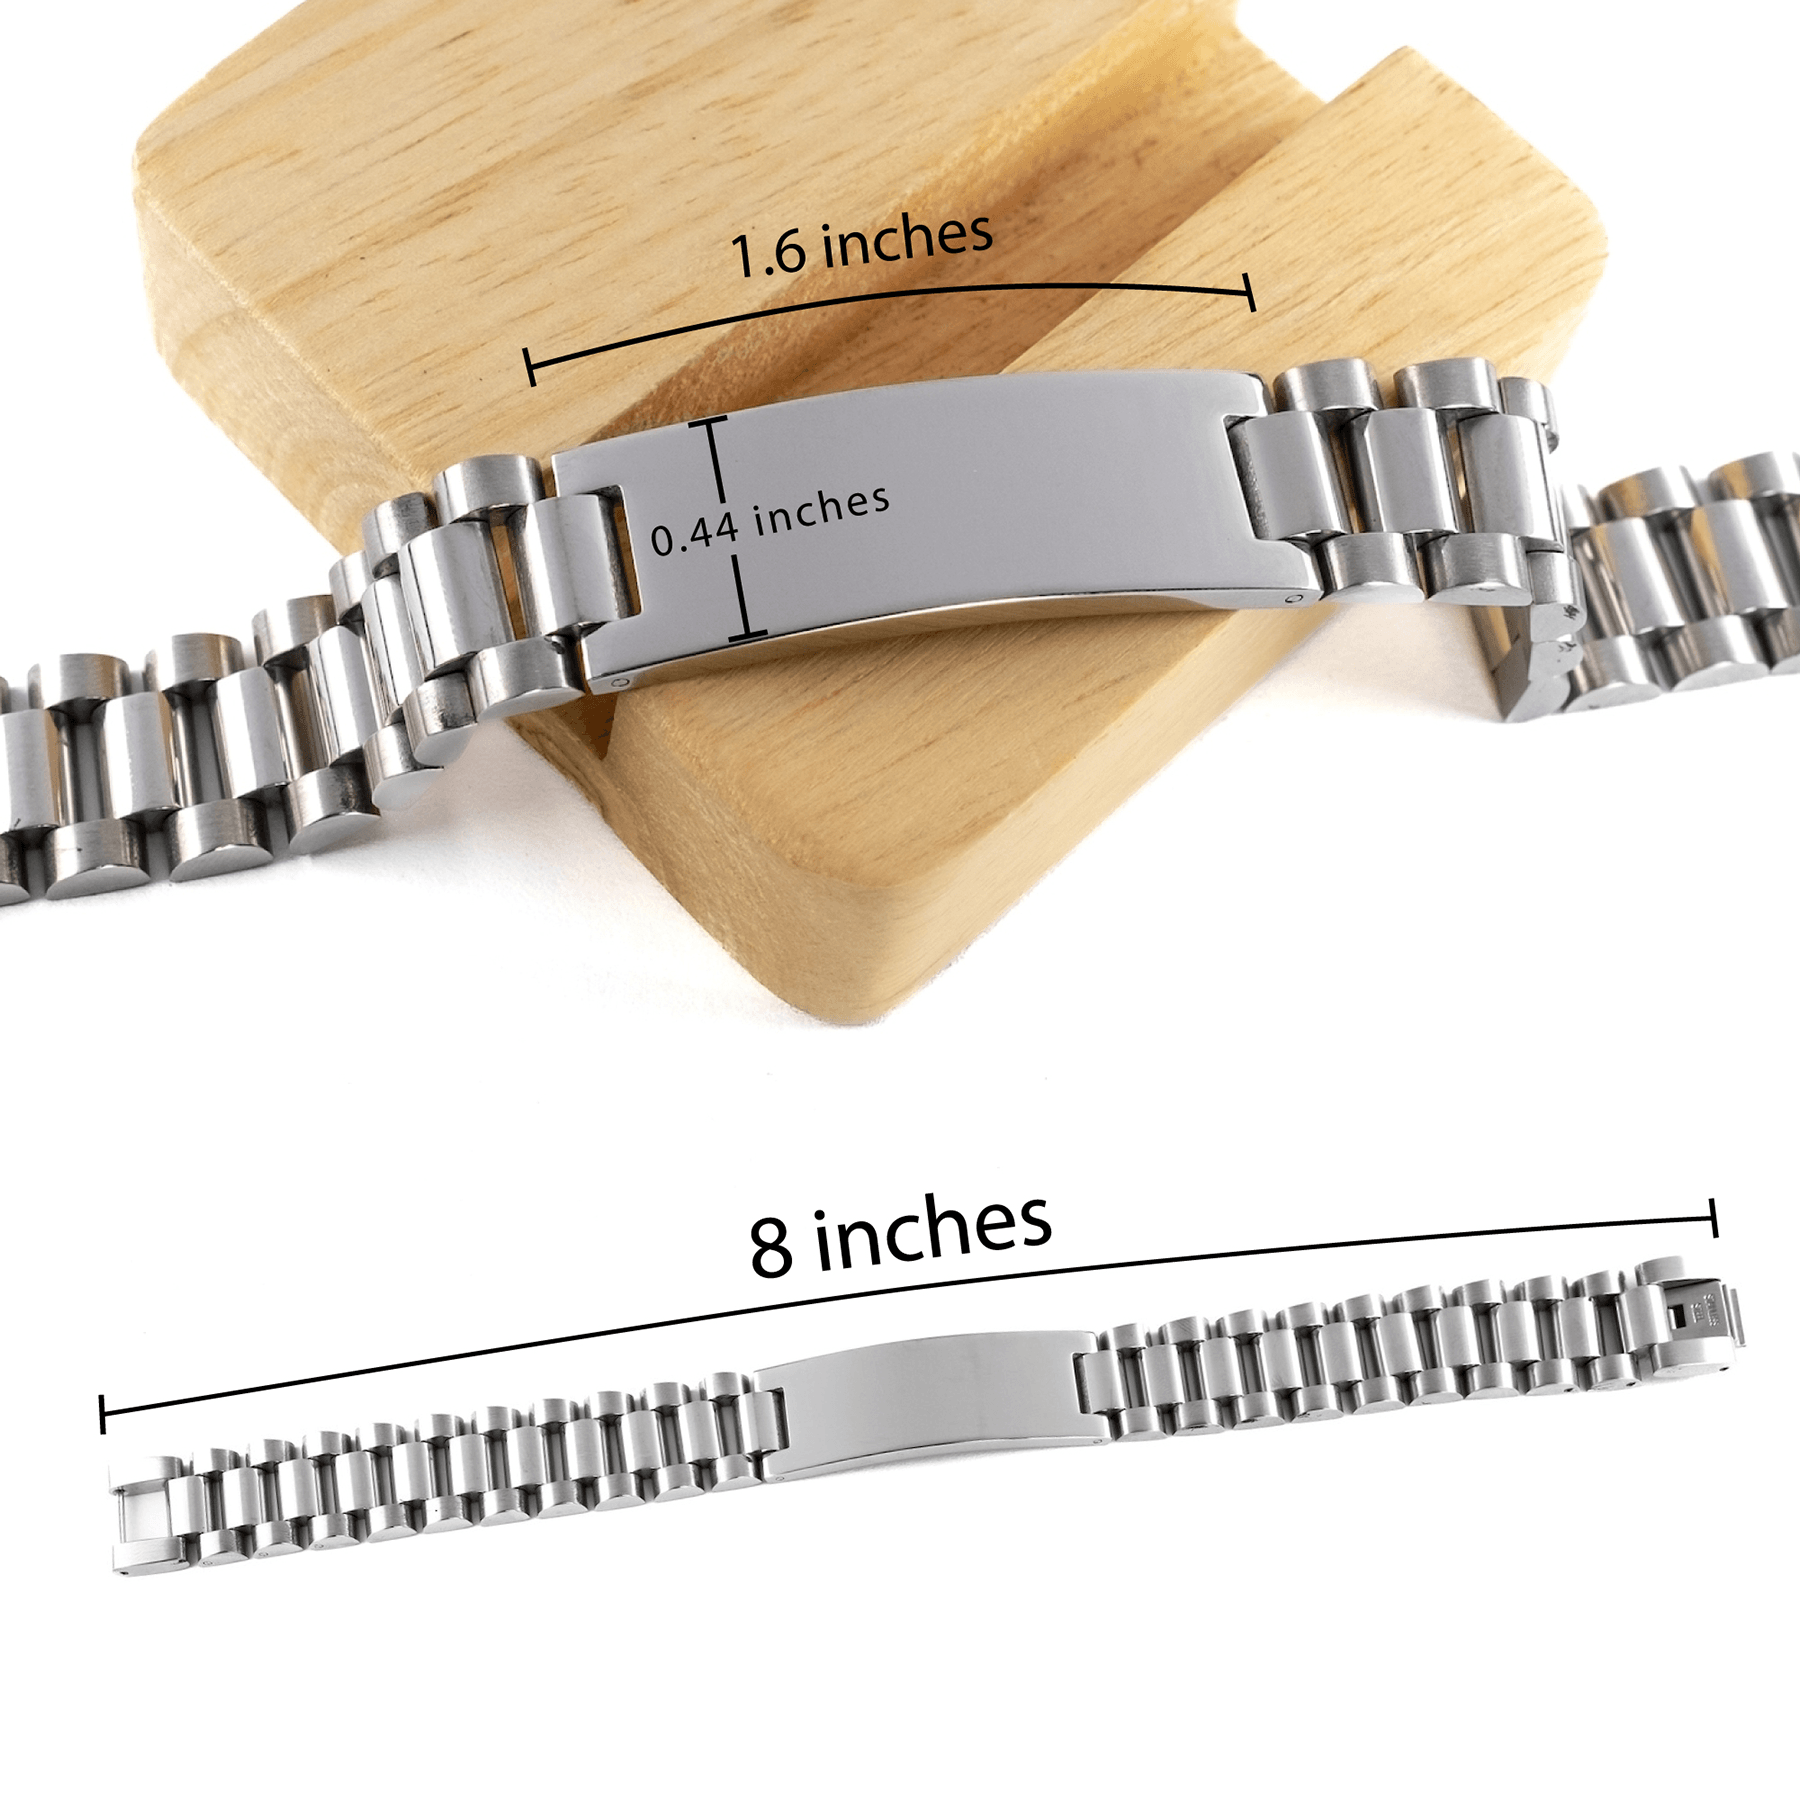 Sarcastic Funeral Director Ladder Stainless Steel Bracelet Gifts, Christmas Holiday Gifts for Funeral Director Birthday, Funeral Director: Because greatness is woven into the fabric of every day, Coworkers, Friends - Mallard Moon Gift Shop